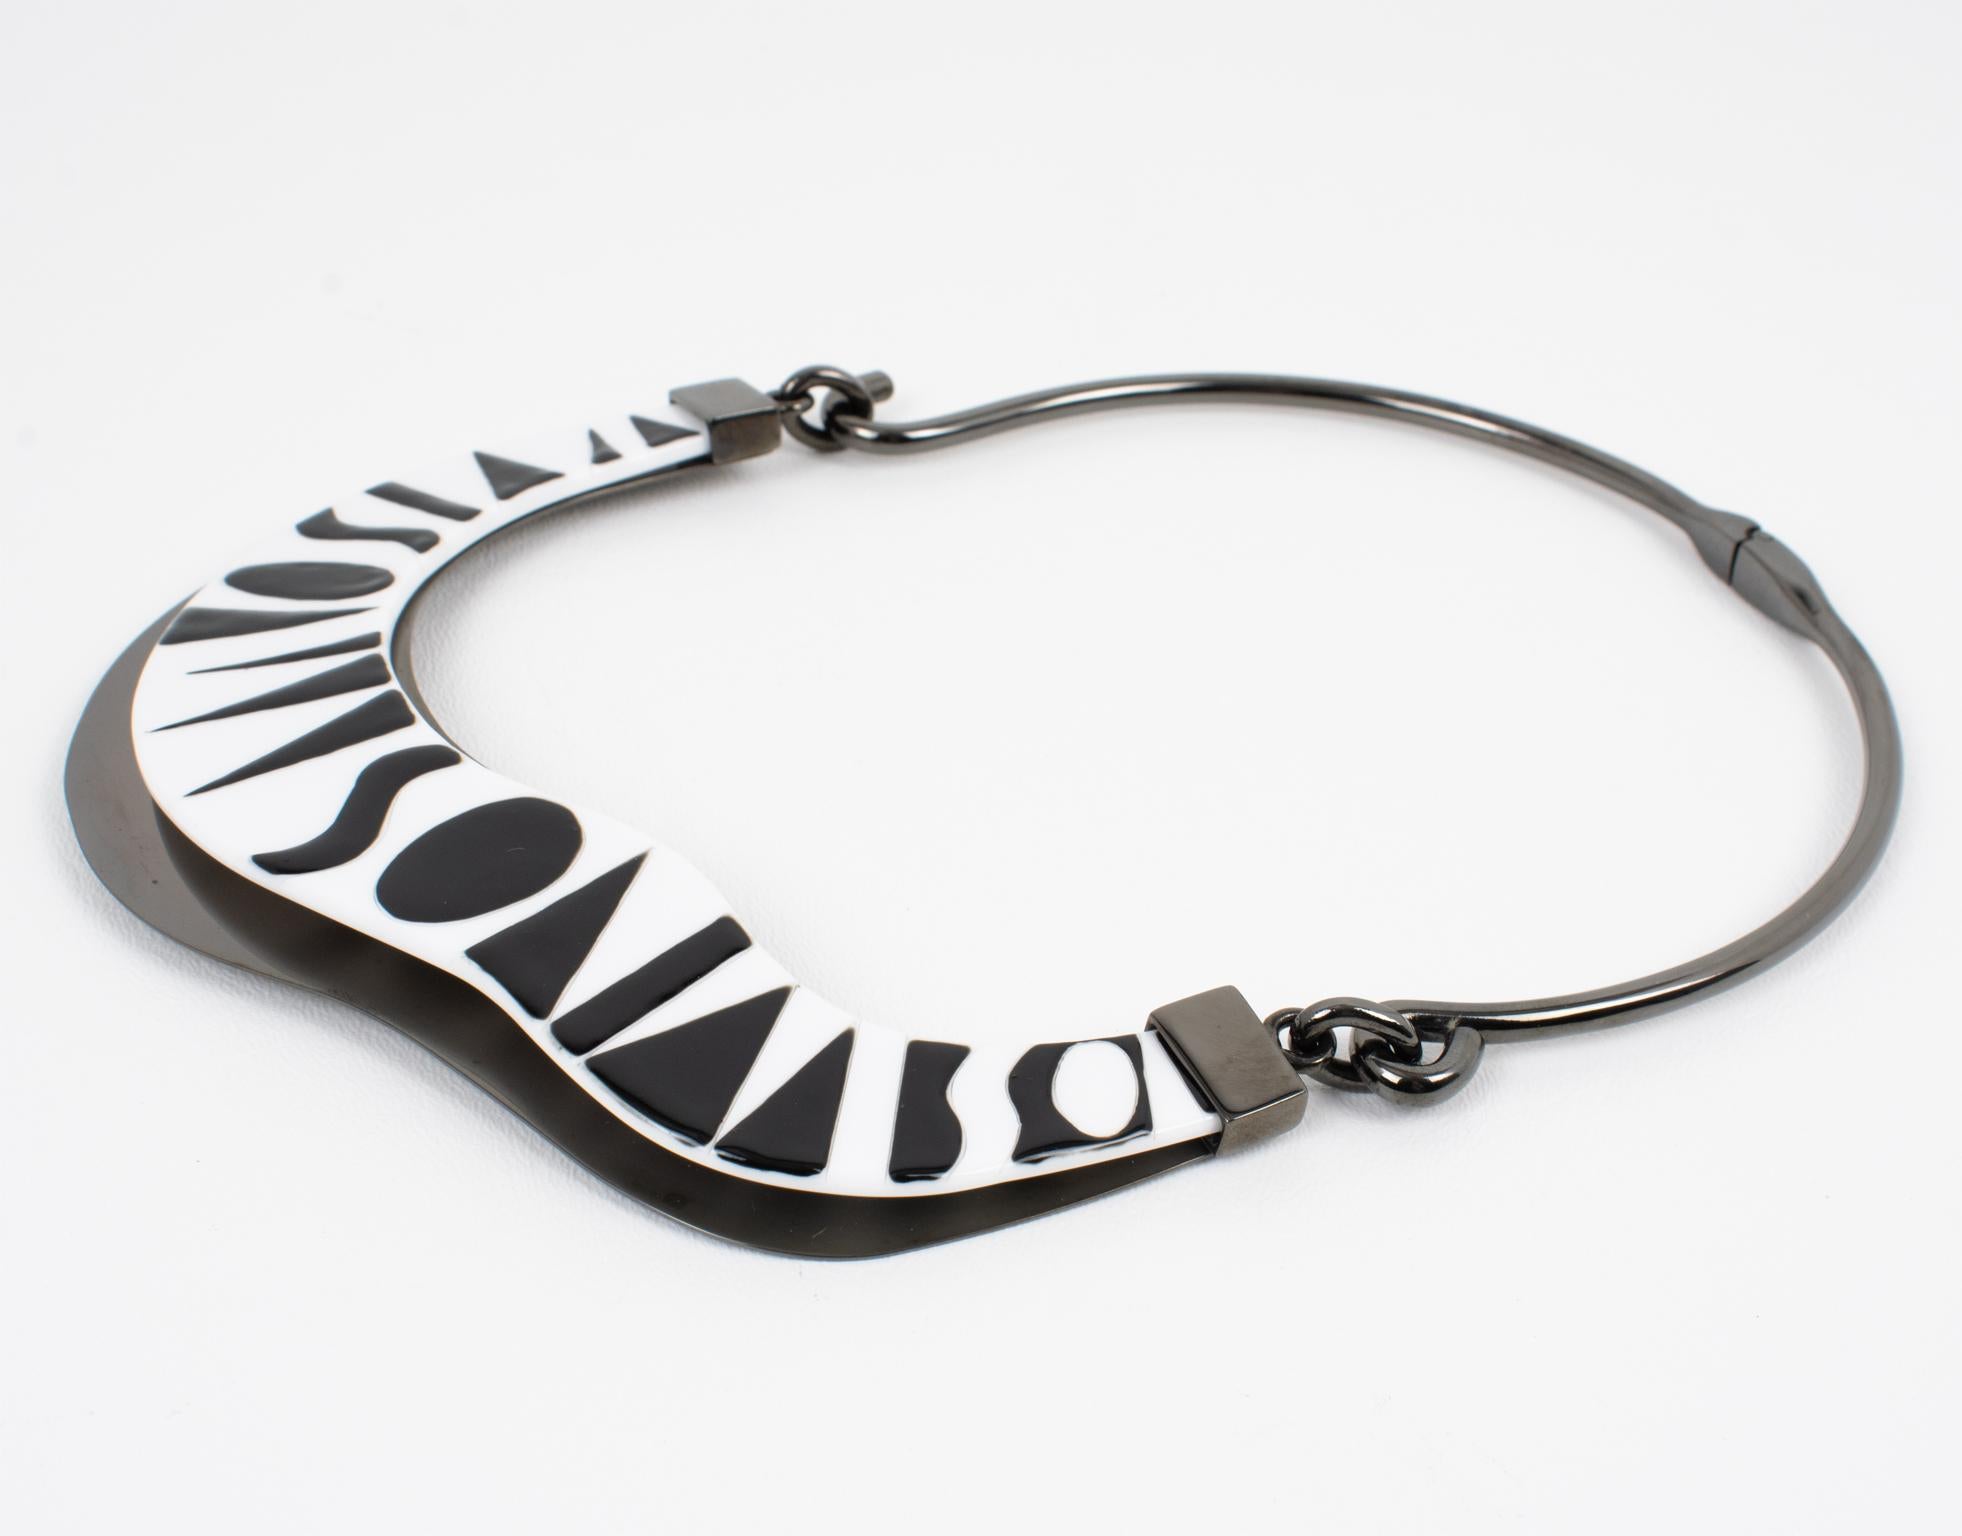 Missoni Black and White Lucite and Metal Choker Necklace, Runway Spring 2014 For Sale 1